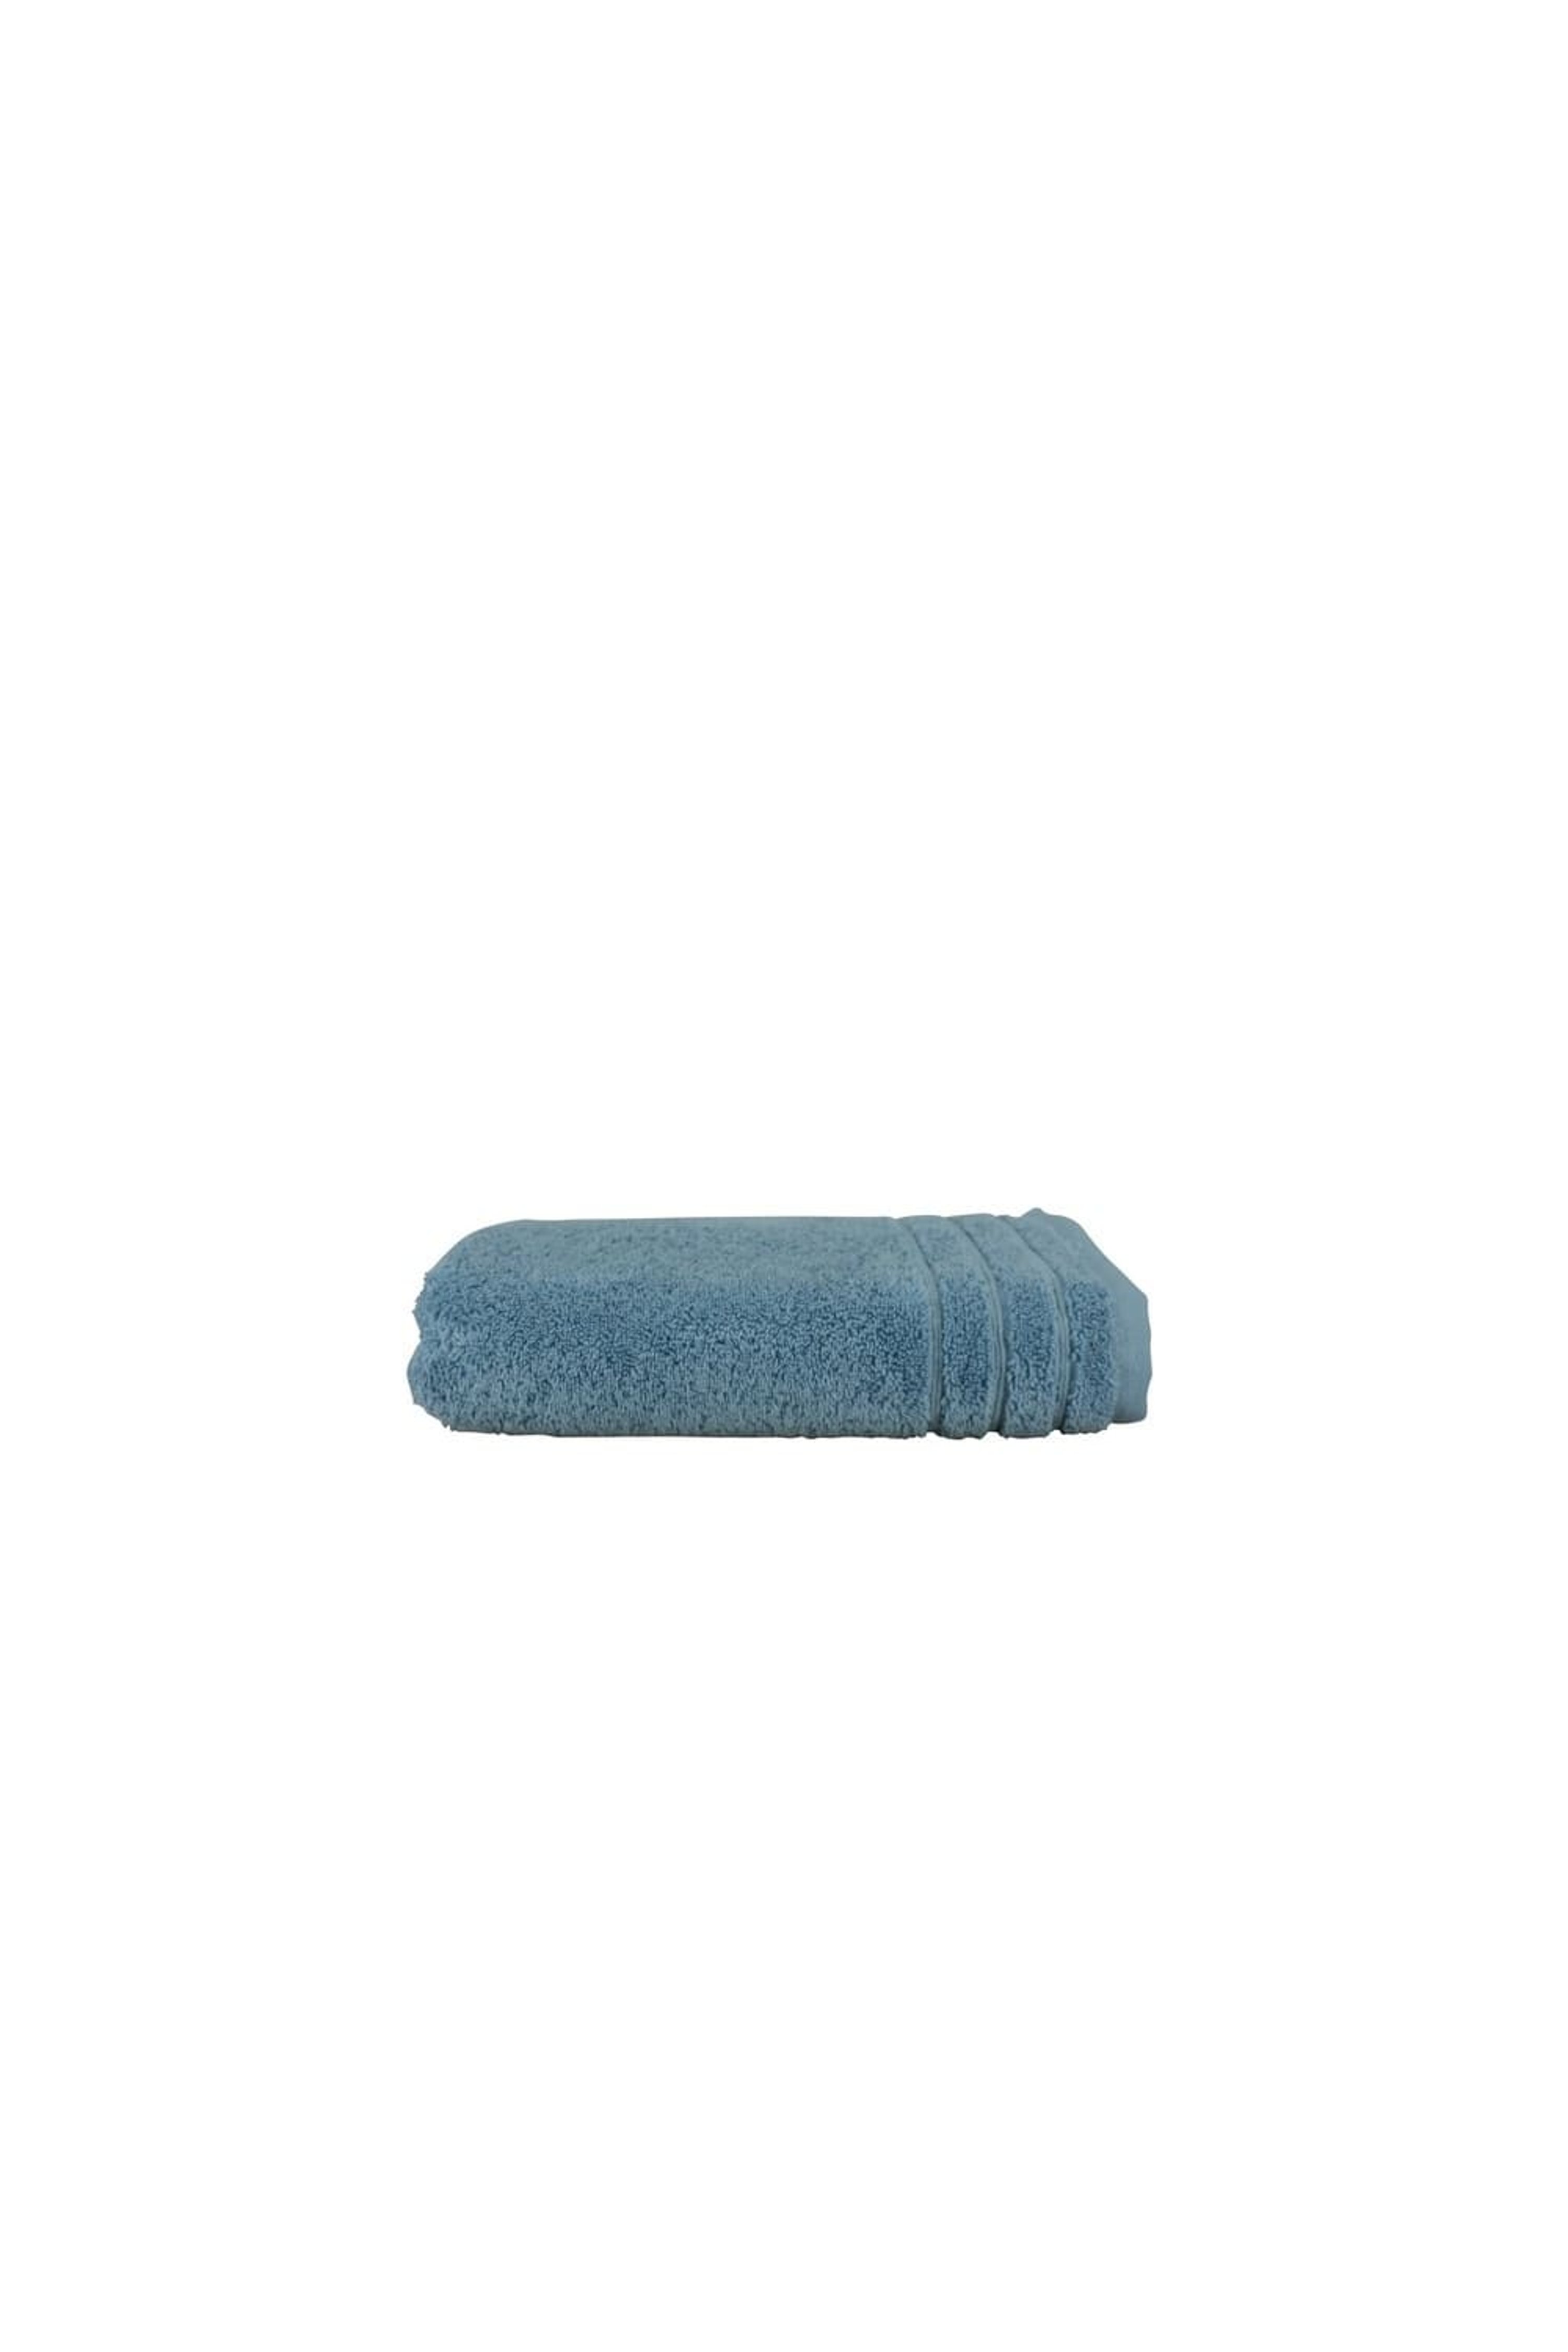 A&r Towels Organic Woven Hand Towel (blue) (one Size)